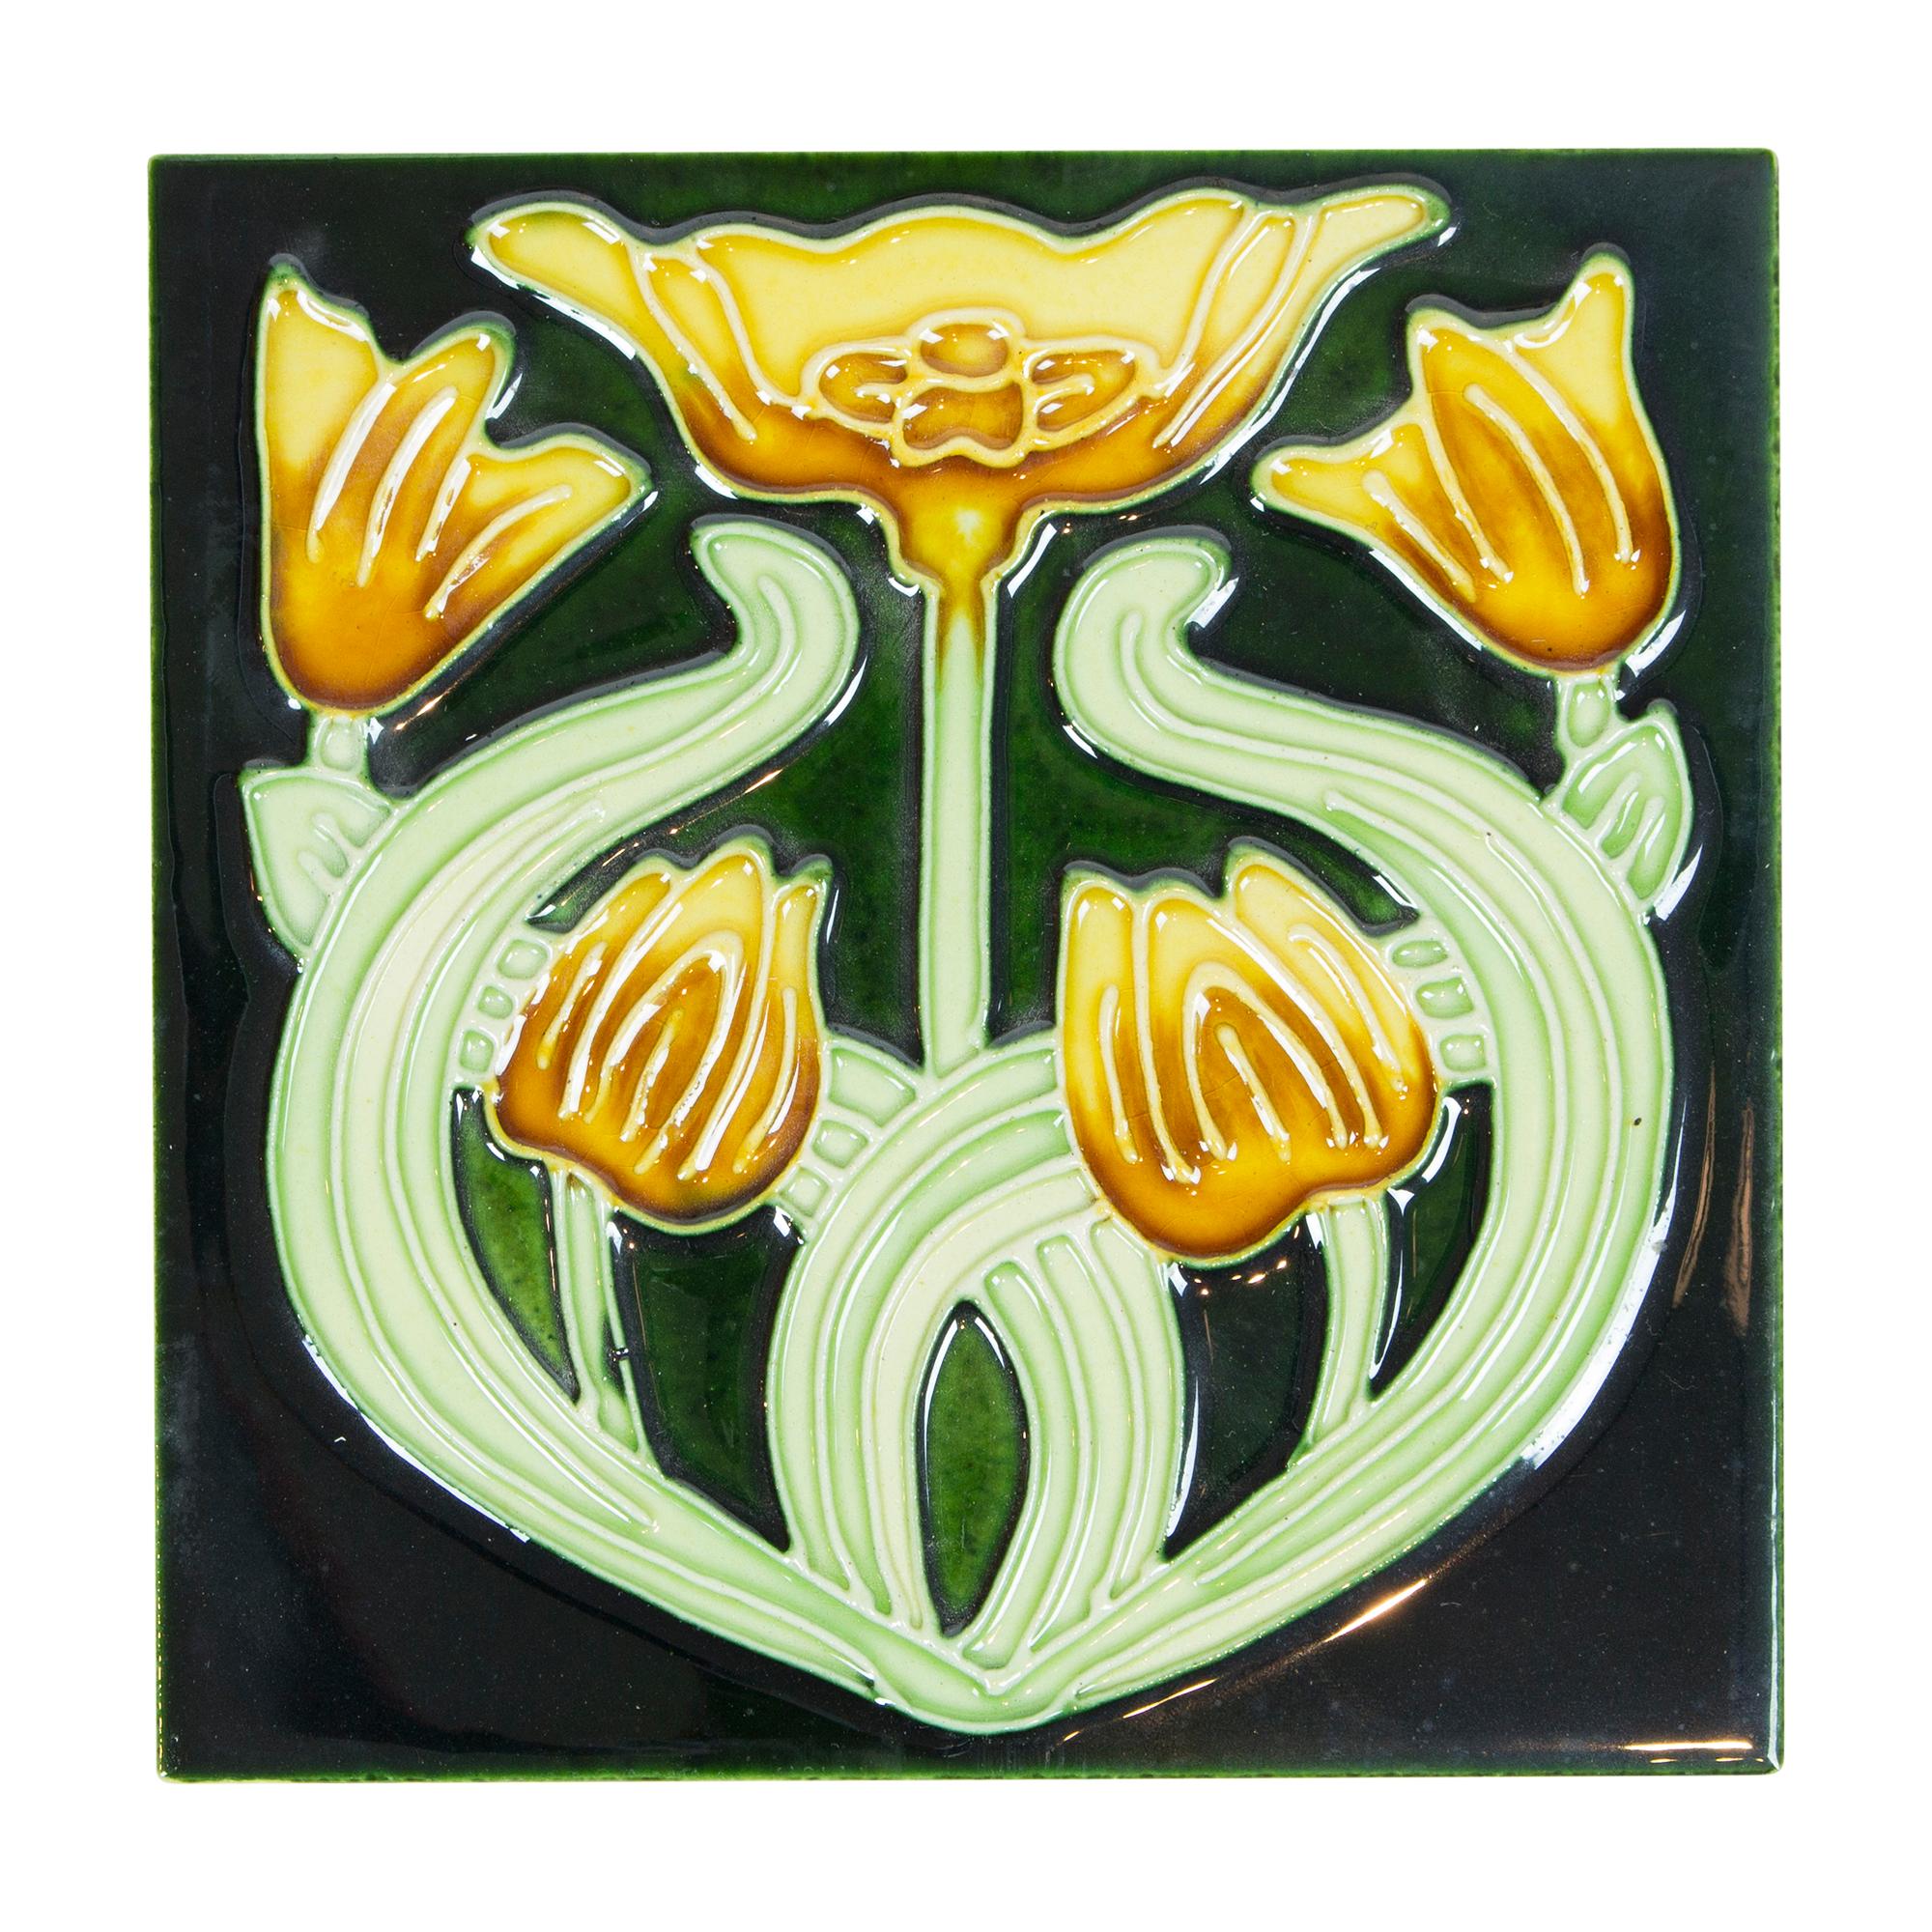 Beautiful 10 ceramic tiles in Art Nouveau style. With a great floral ornament in the form of an embossed relief with glaze coating. The tiles are similarly handcrafted as around 1900, the difference is basically only the uniform format. The glaze